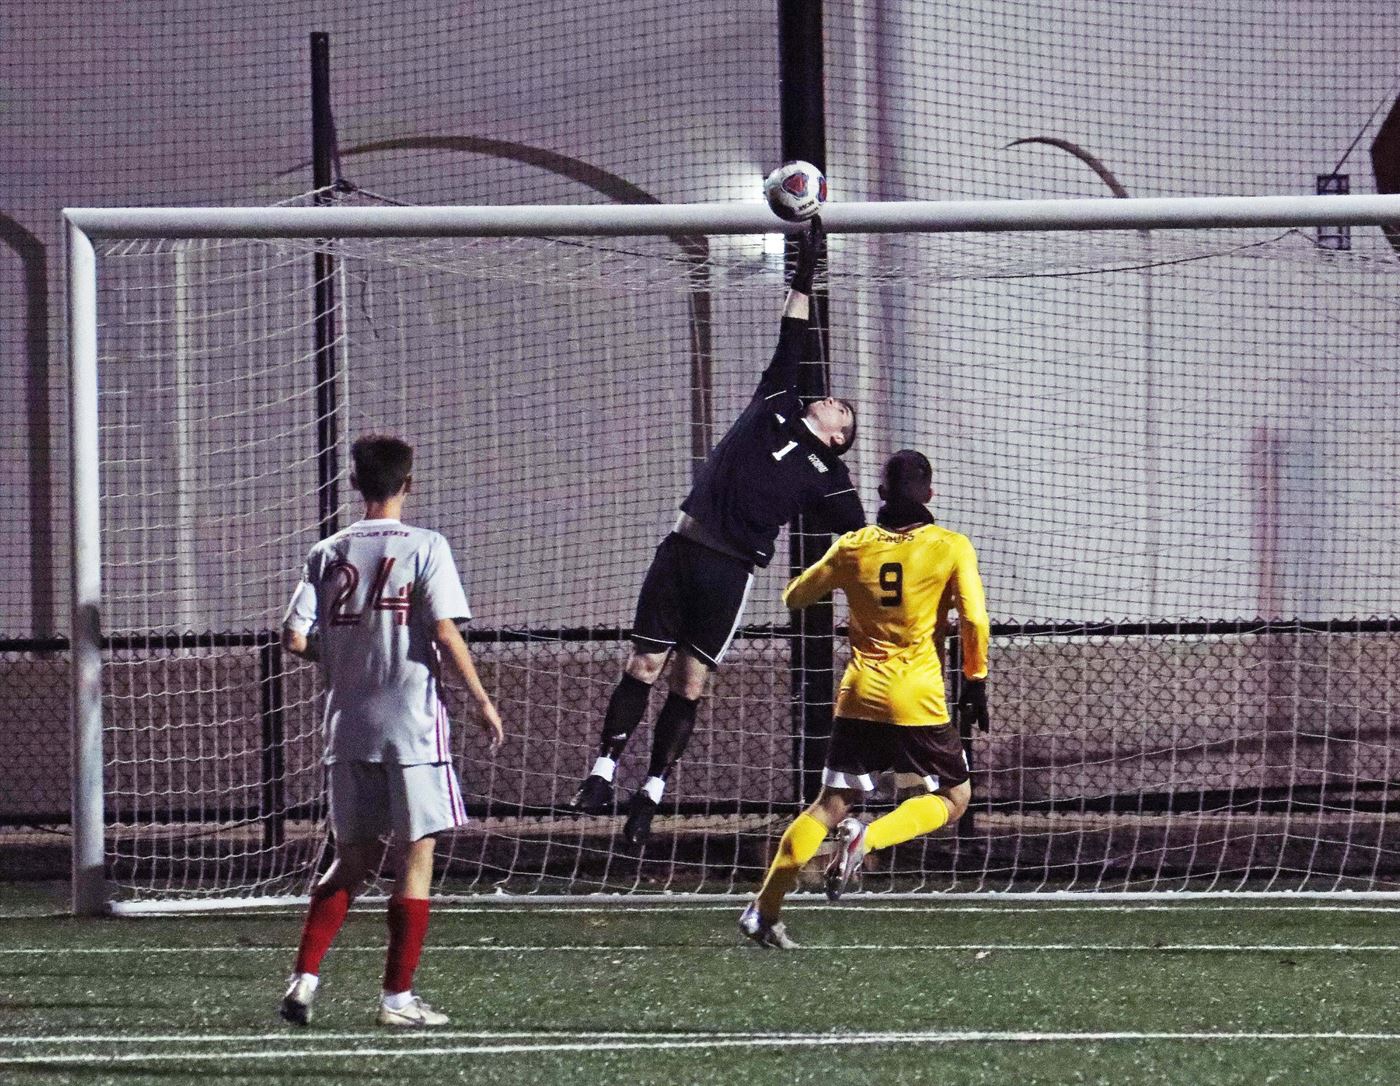 Senior goalkeeper Shane Keenan secures a save after a shot from one of Rowan University's strikers. Photo courtesy of Julian Rigg